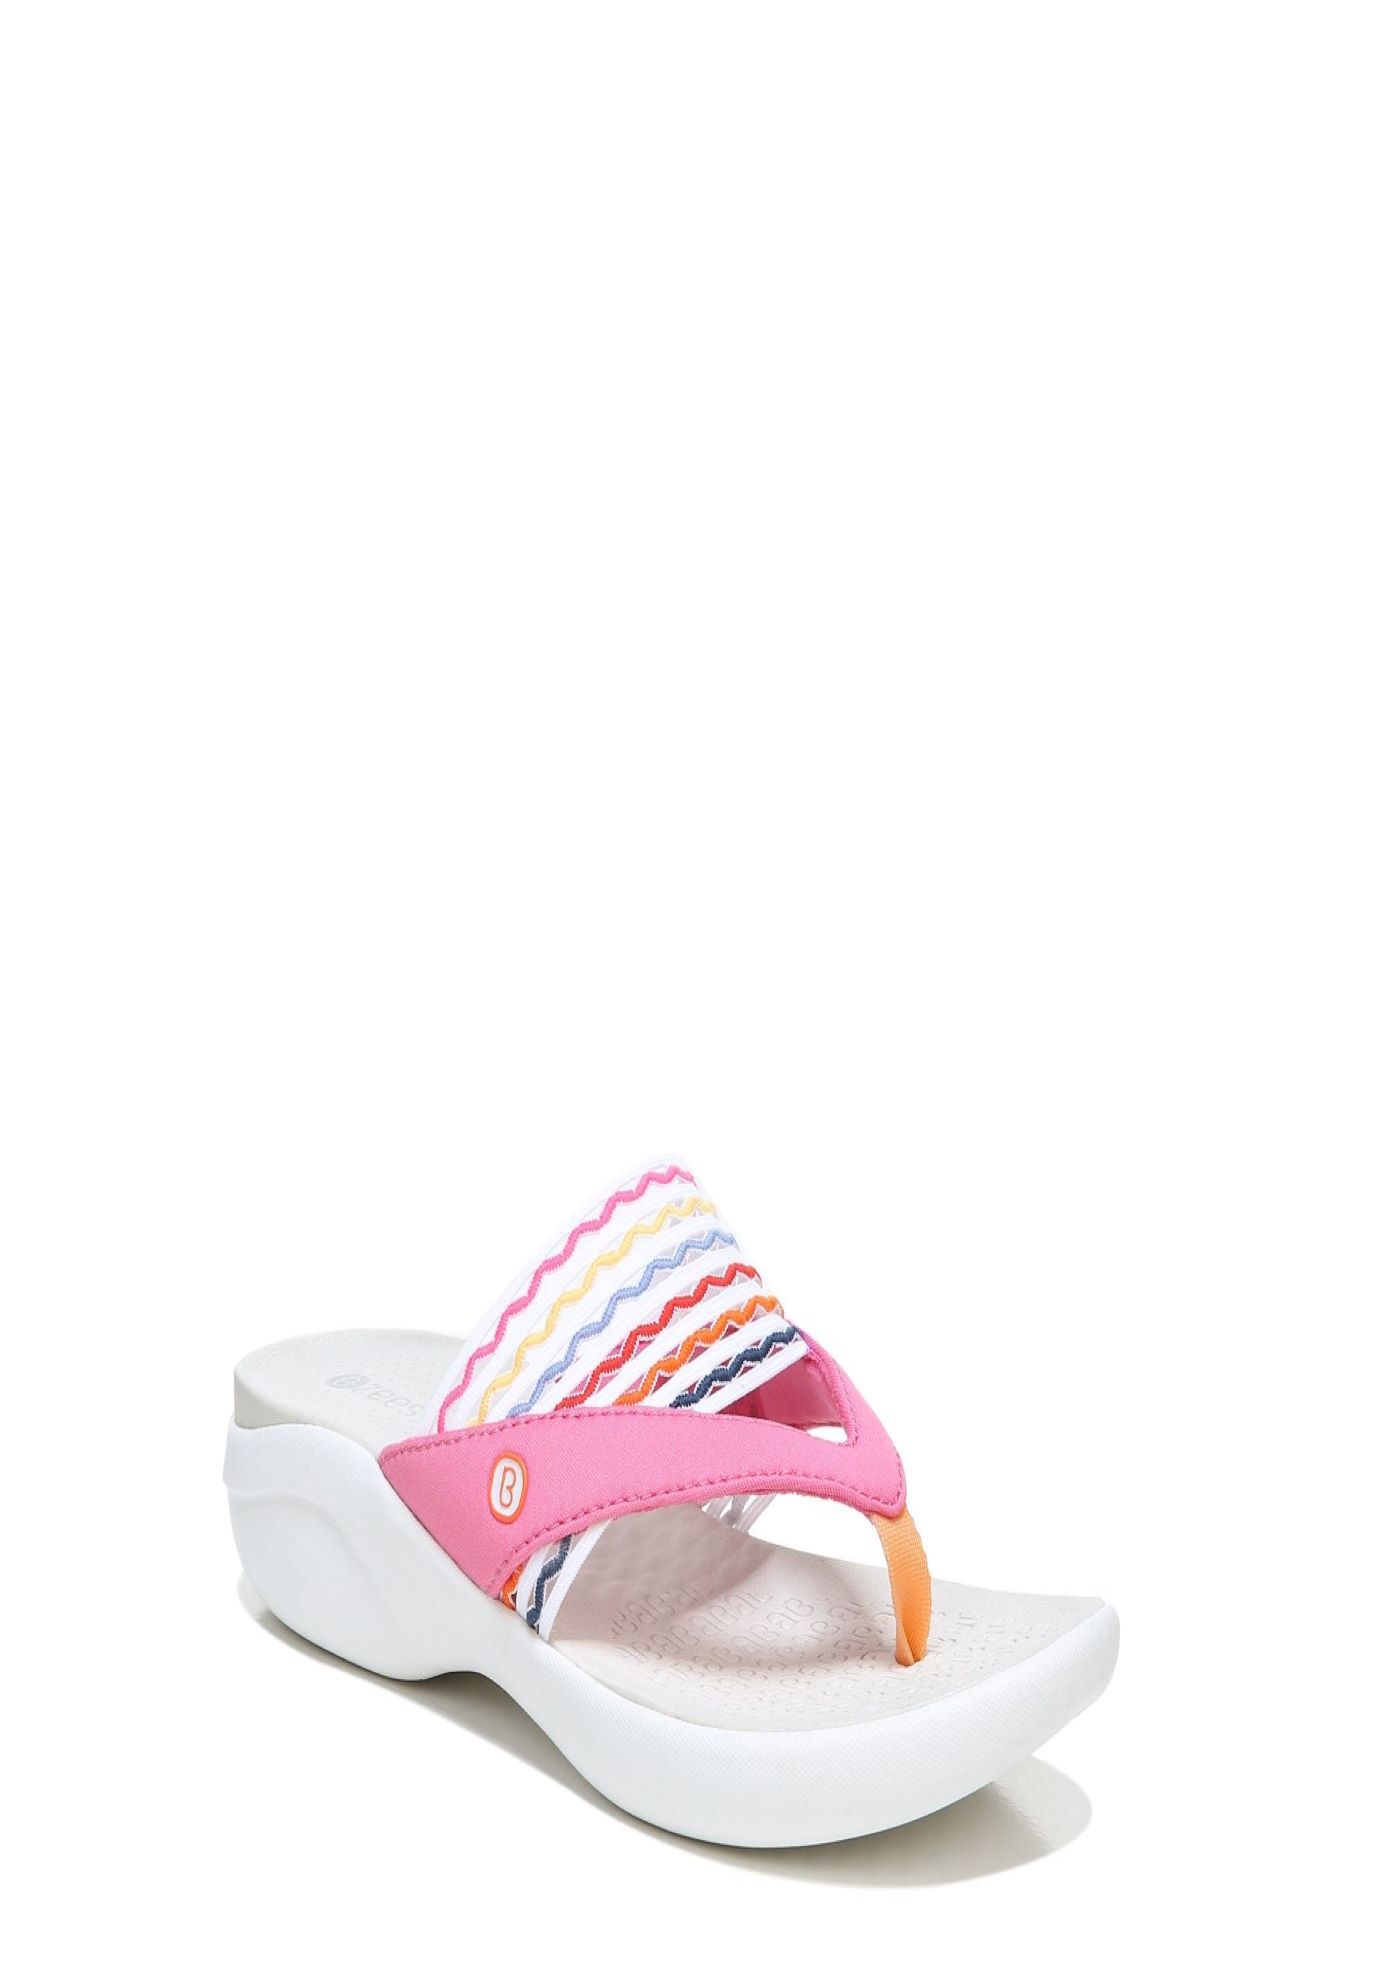 Wide Width Women's Cabana Sandals by BZees in Pink (Size 10 W)